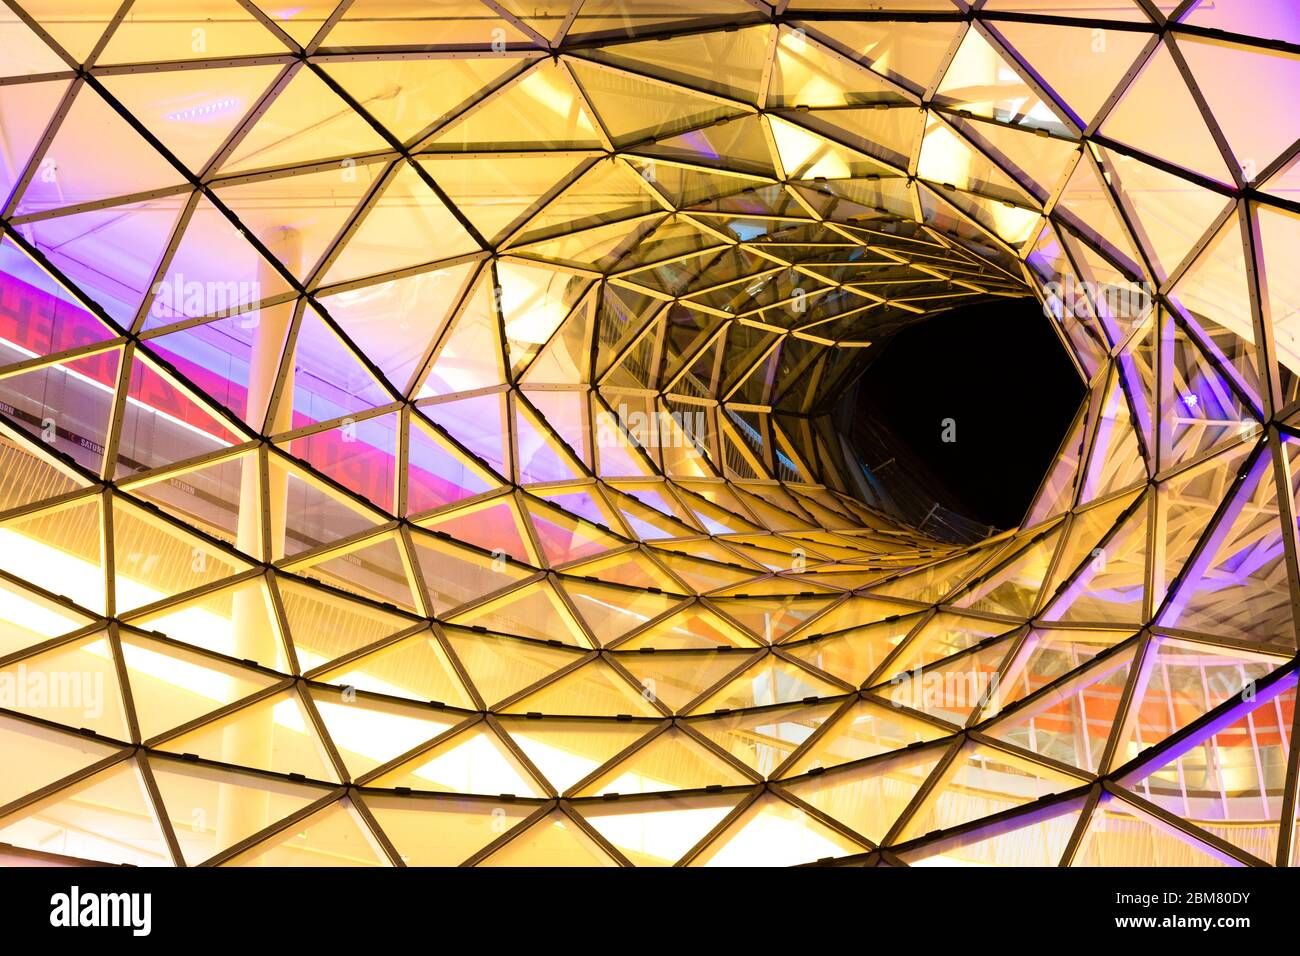 Interior detail of the MyZeil mall in Frankfurt am Main, Hesse, Germany. MyZeil is a shopping mall in the Zeil, Frankfurt, Germany. Stock Photo